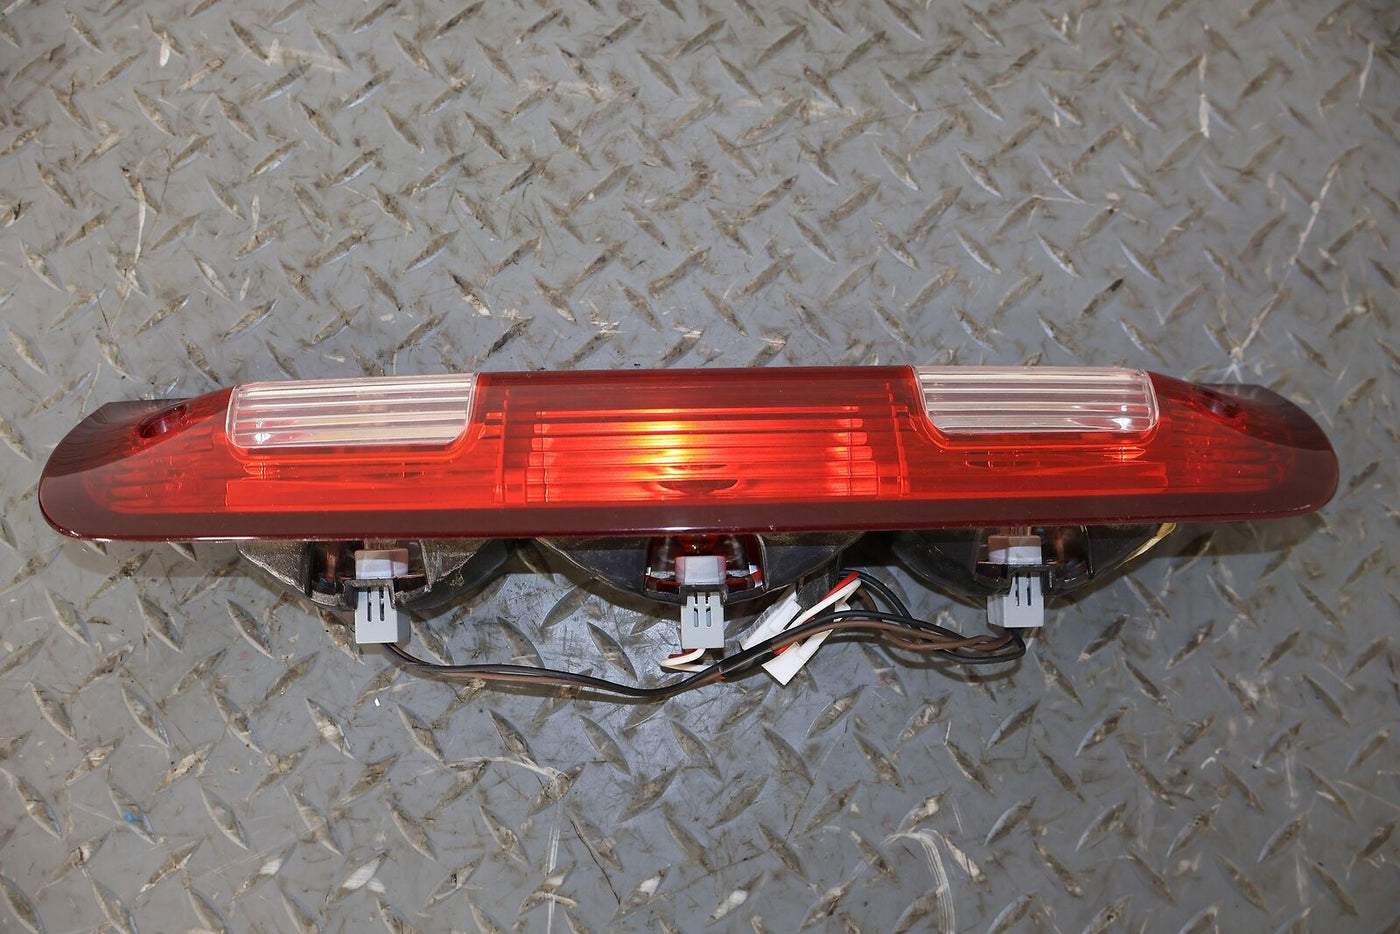 09-18 Ram 1500 Classic Crew Cab 3rd Brake Light OEM (Tested) W/ Pigtails